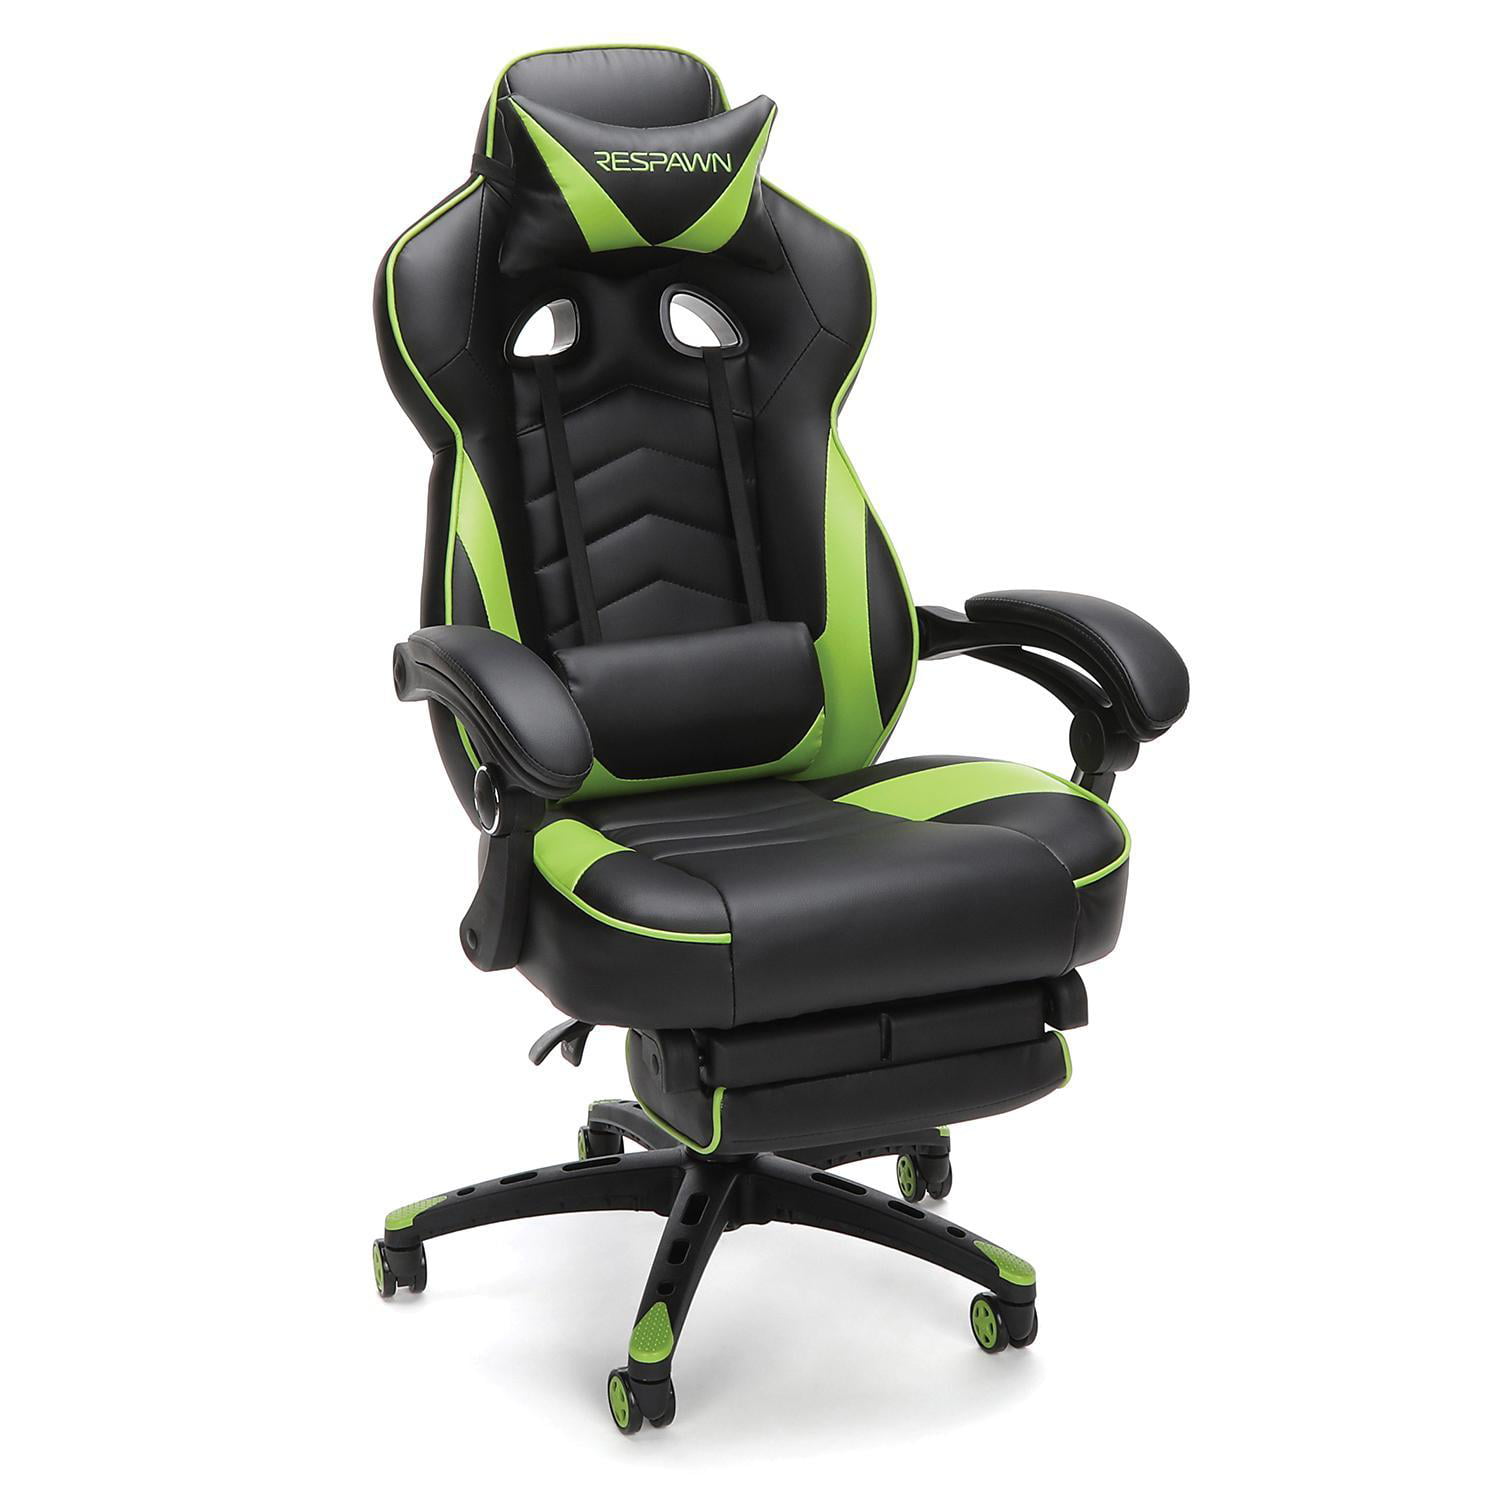 Respawn-110 Racing Style Gaming Chair, Reclining Ergonomic Leather